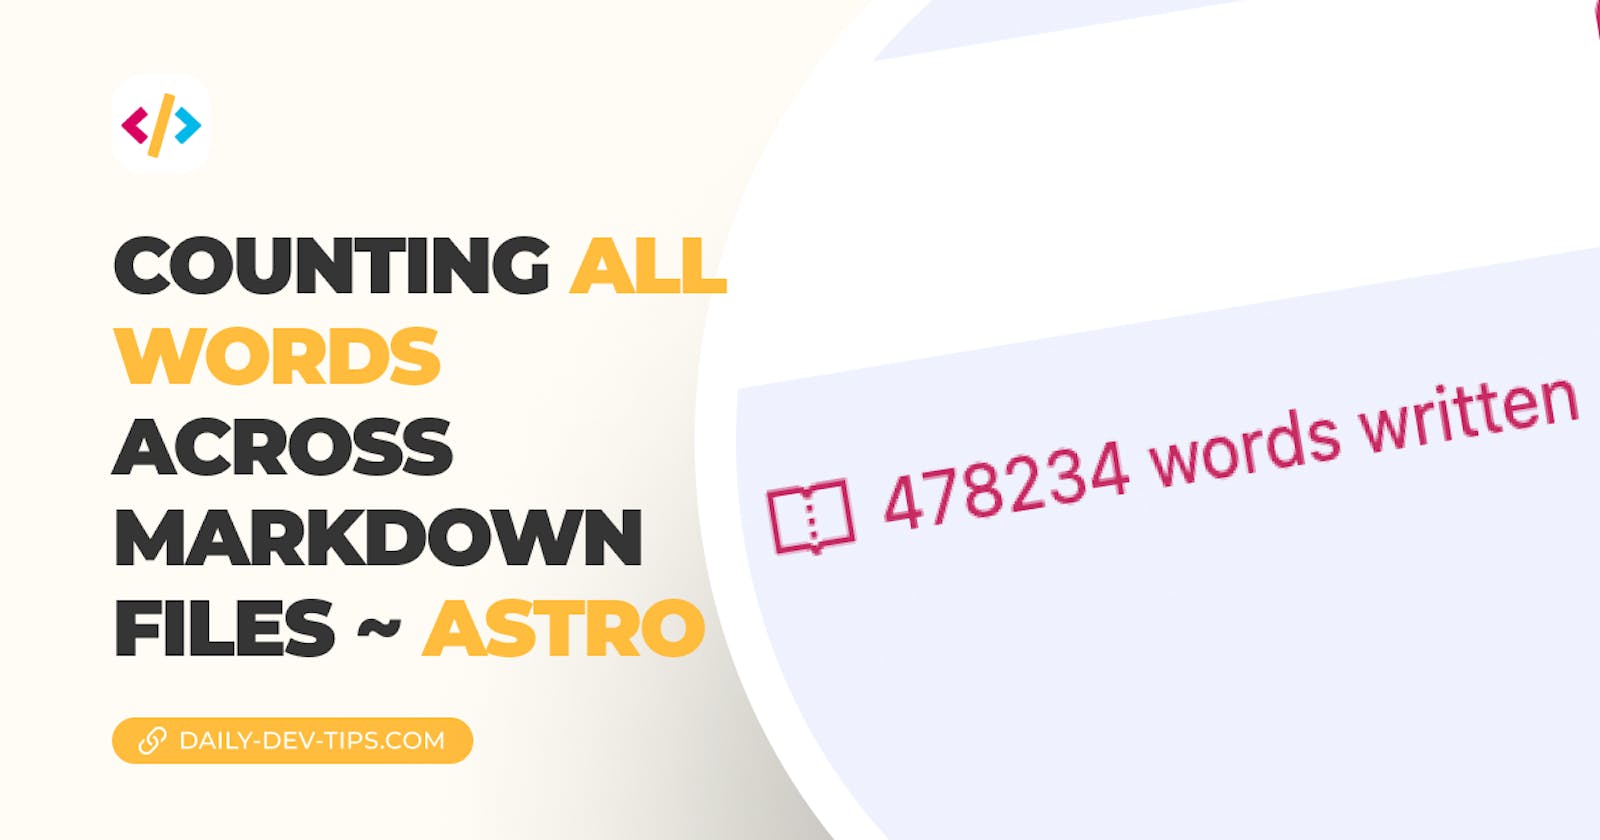 Counting all words across markdown files ~ Astro